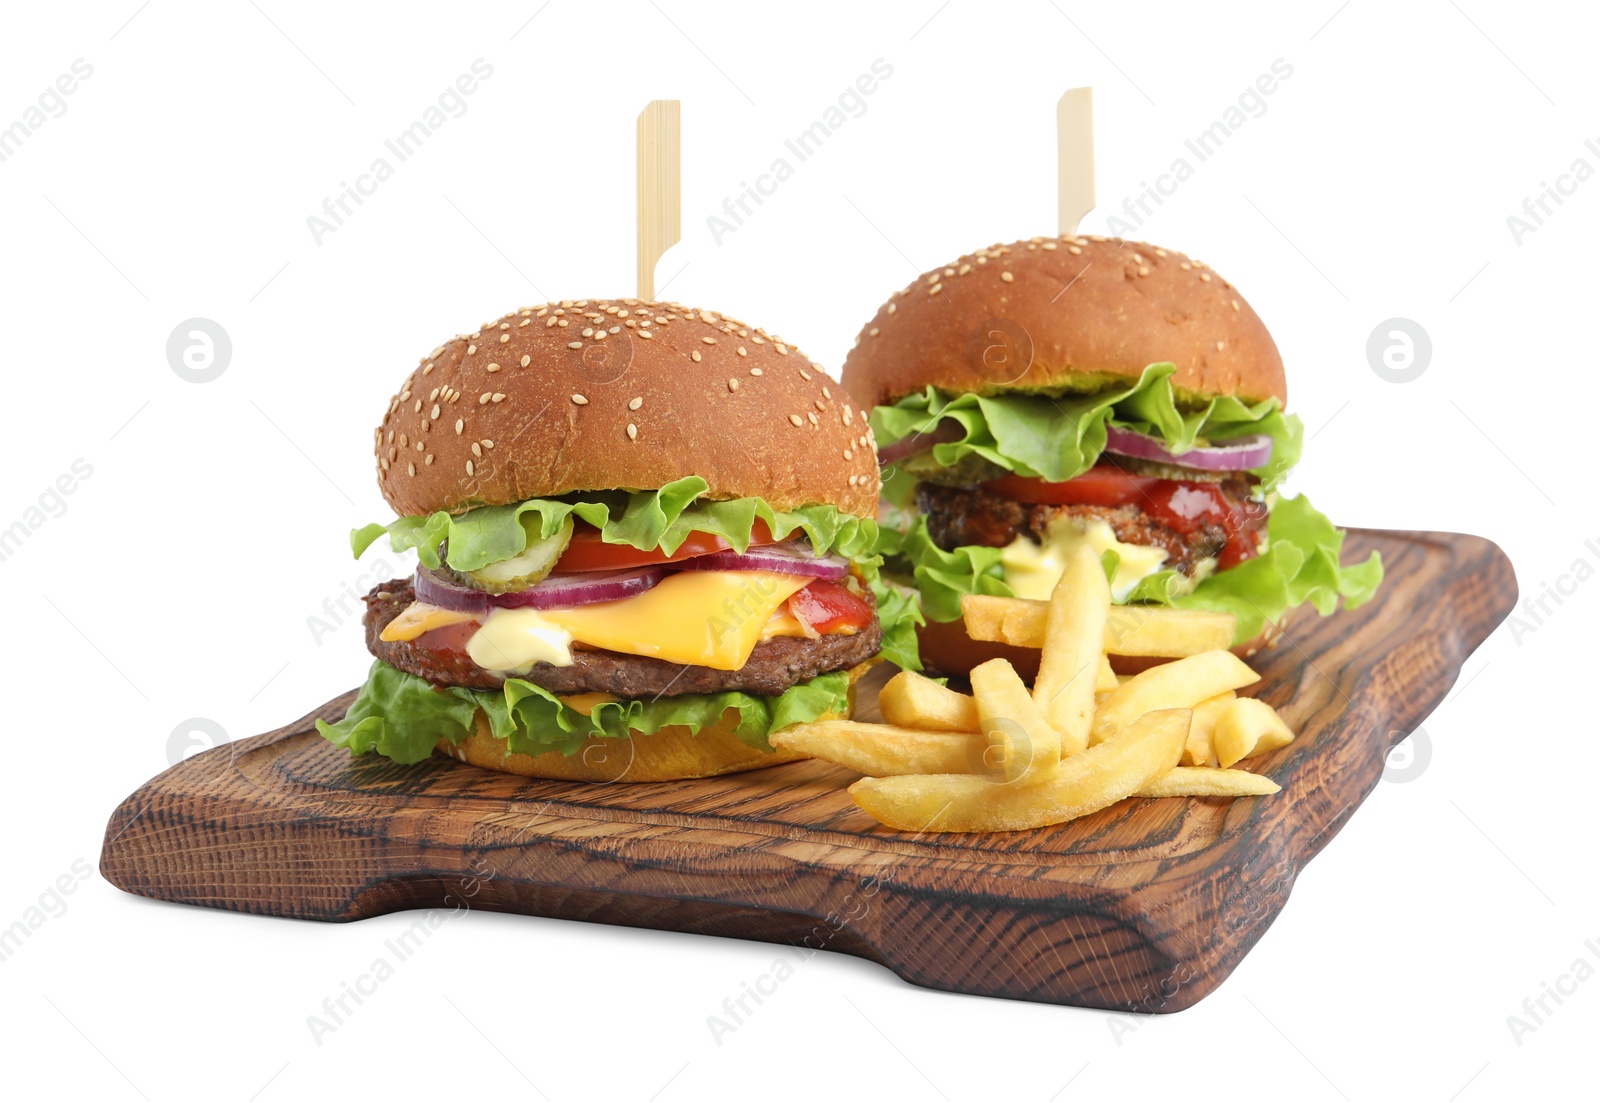 Photo of Delicious burgers with beef patty and french fries isolated on white